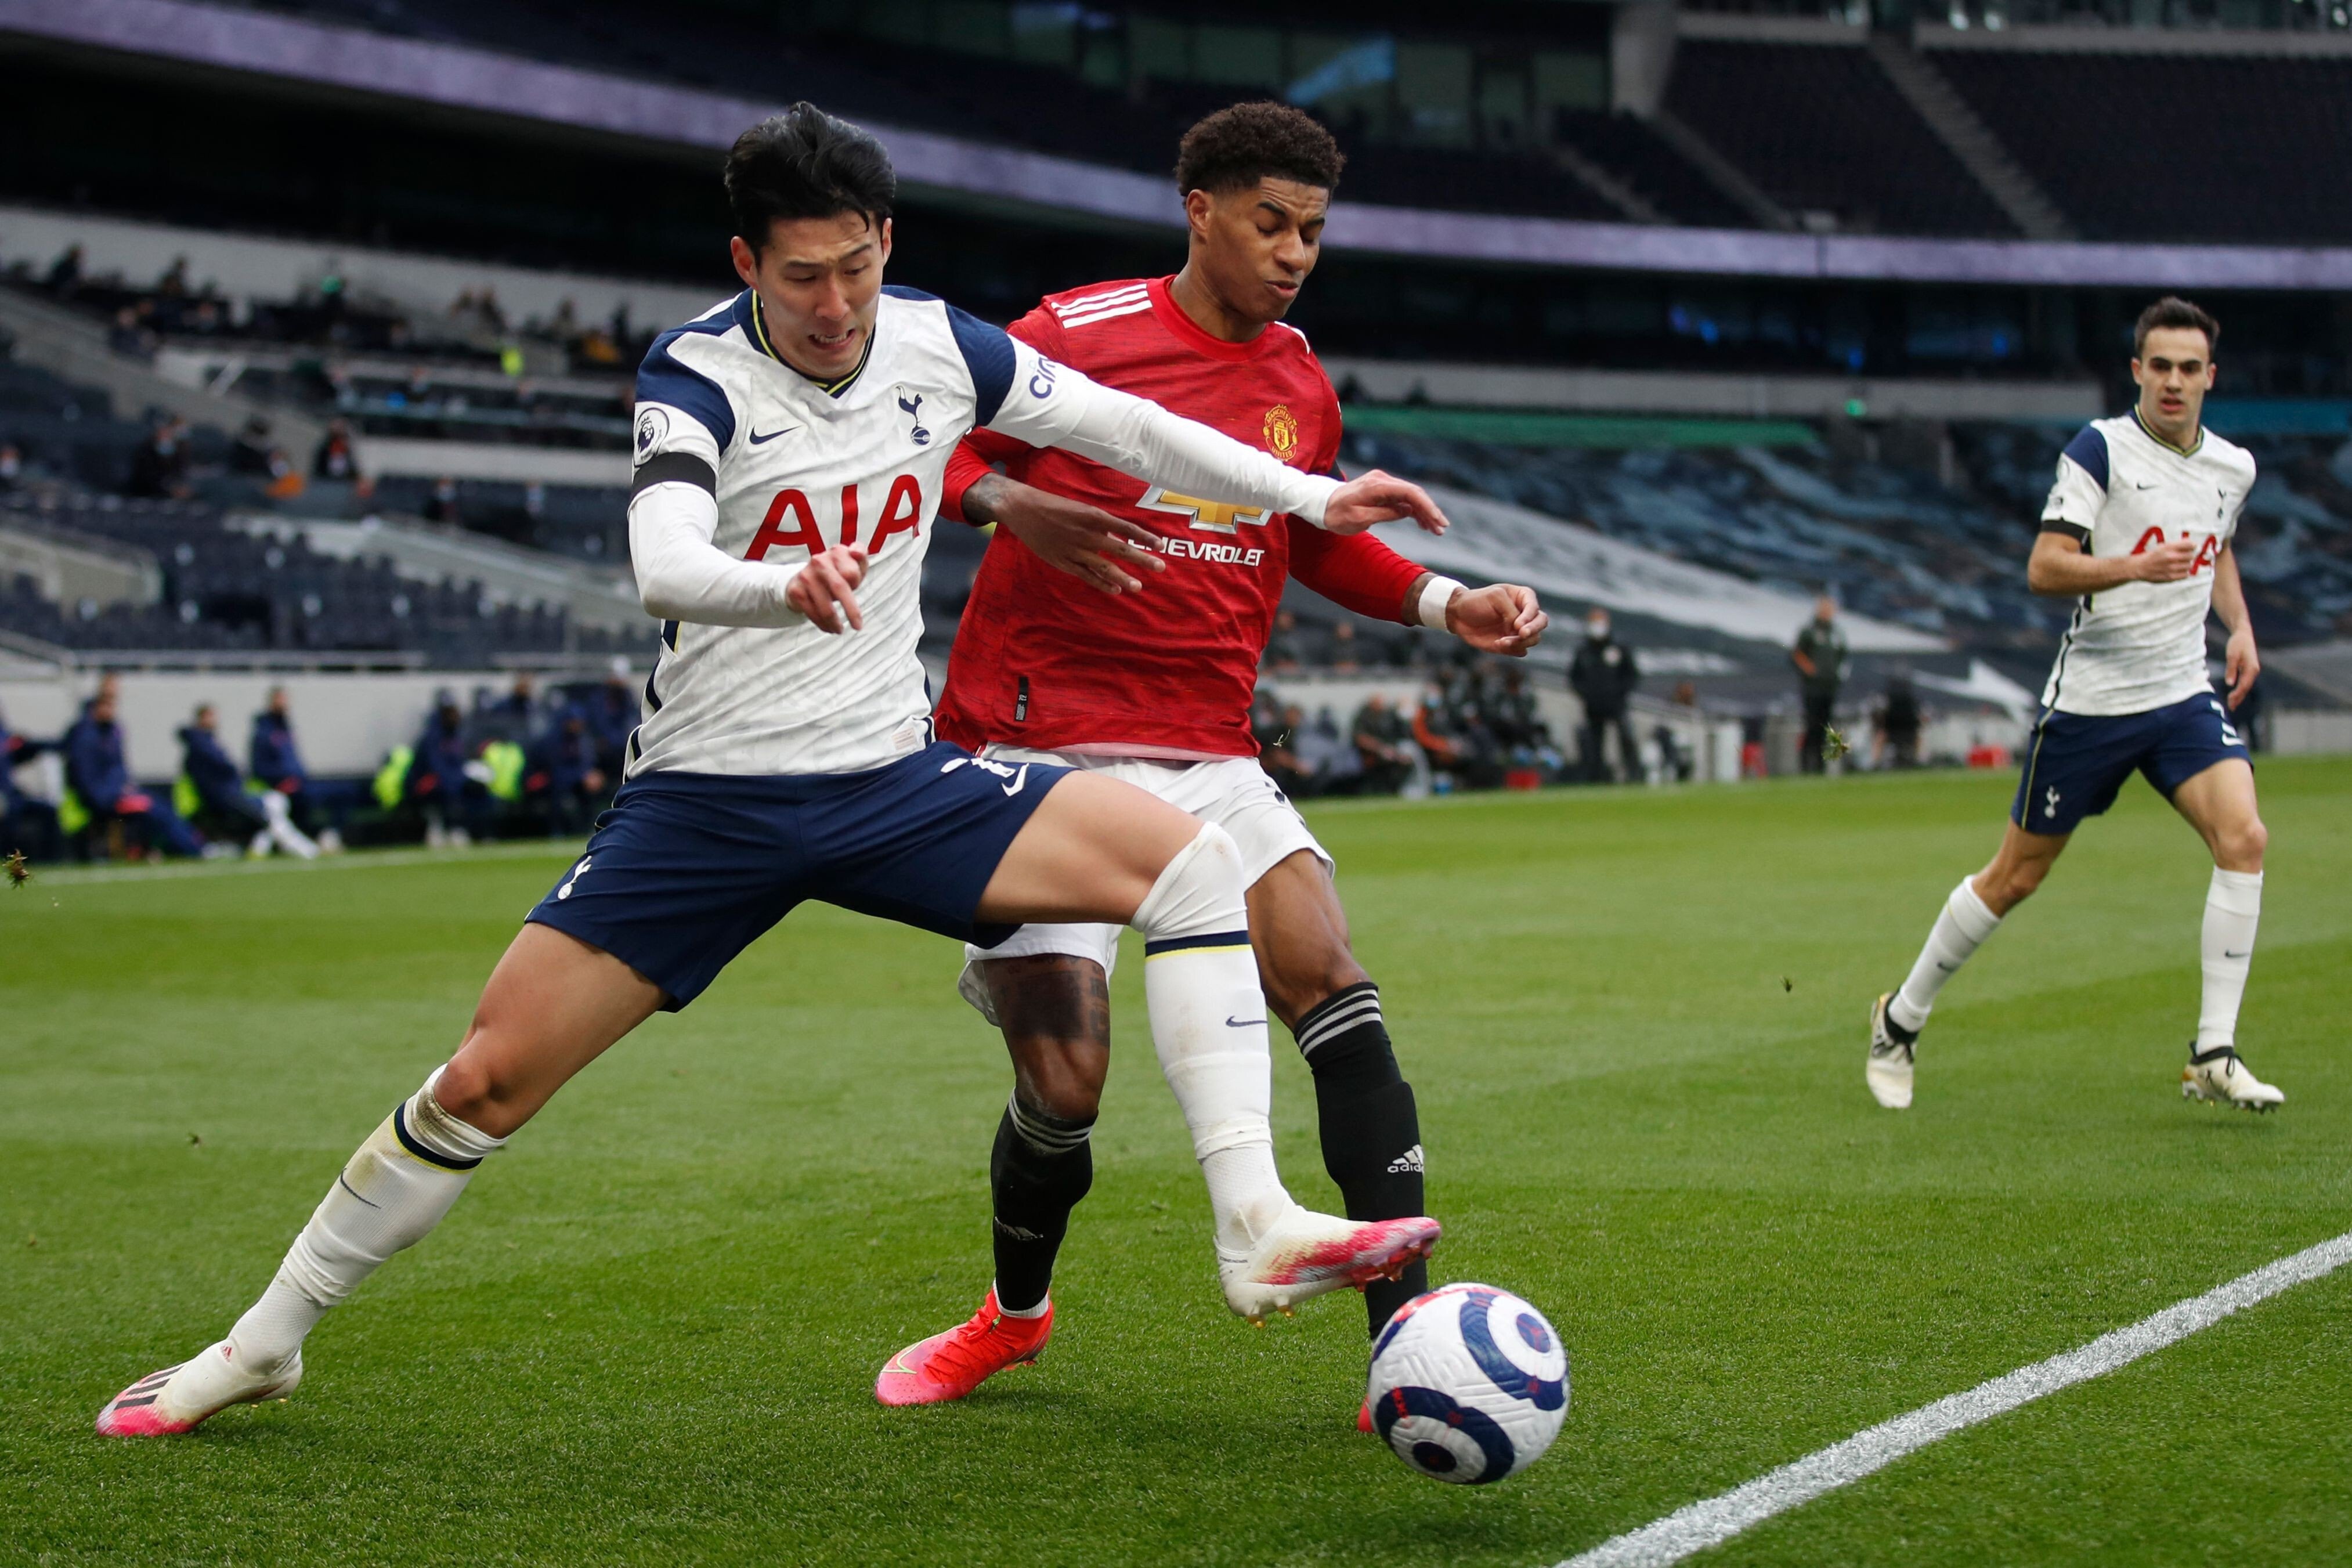 Tottenham Hotspur's South Korean striker Son Heung-min fights for the ball with Manchester United's English forward Marcus Rashford during an English Premier League match at the Tottenham Hotspur Stadium in April, 2021. Photo: AFP